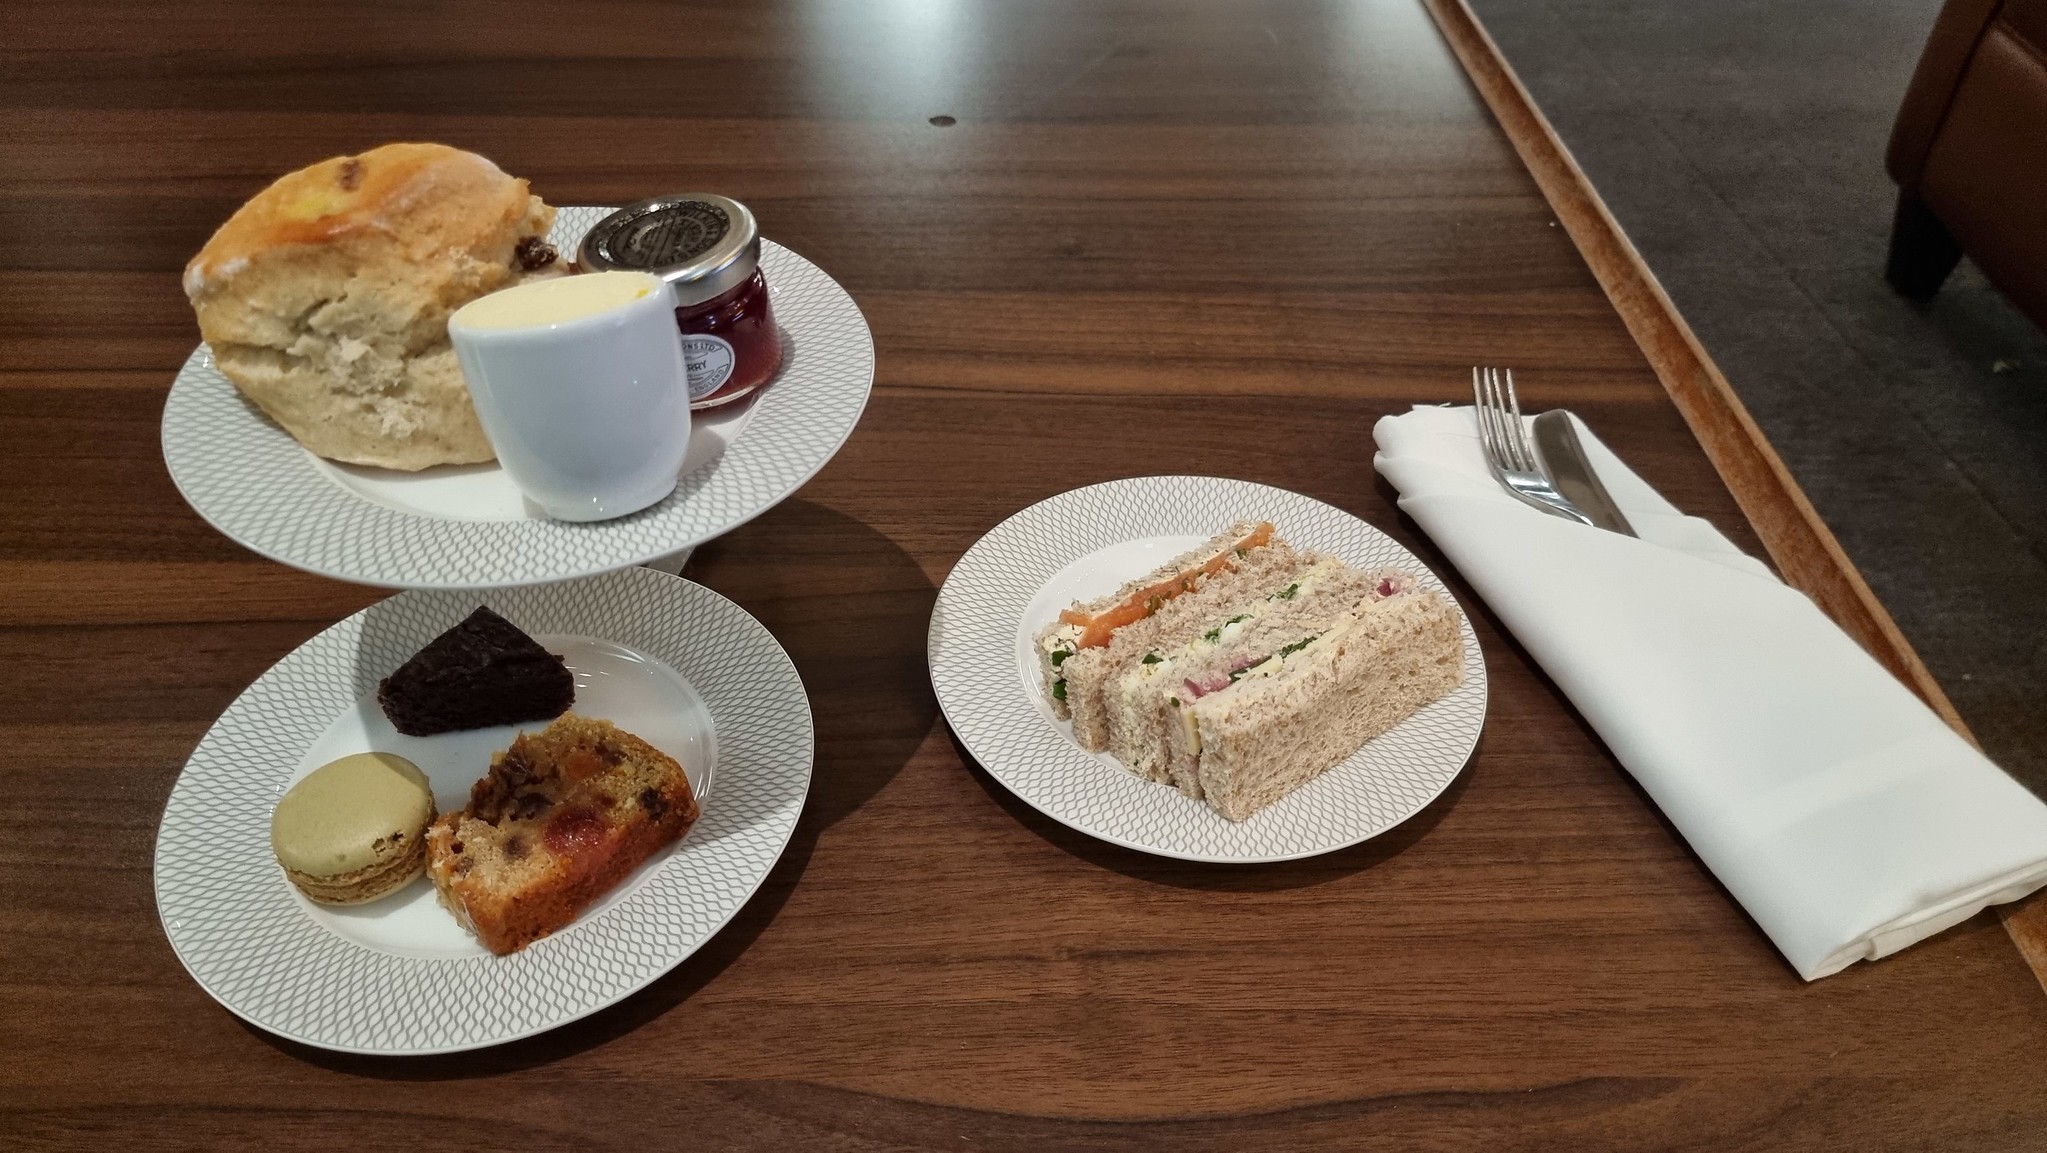 The champagne afternoon tea enjoyed in the CCR at Heathrow T5